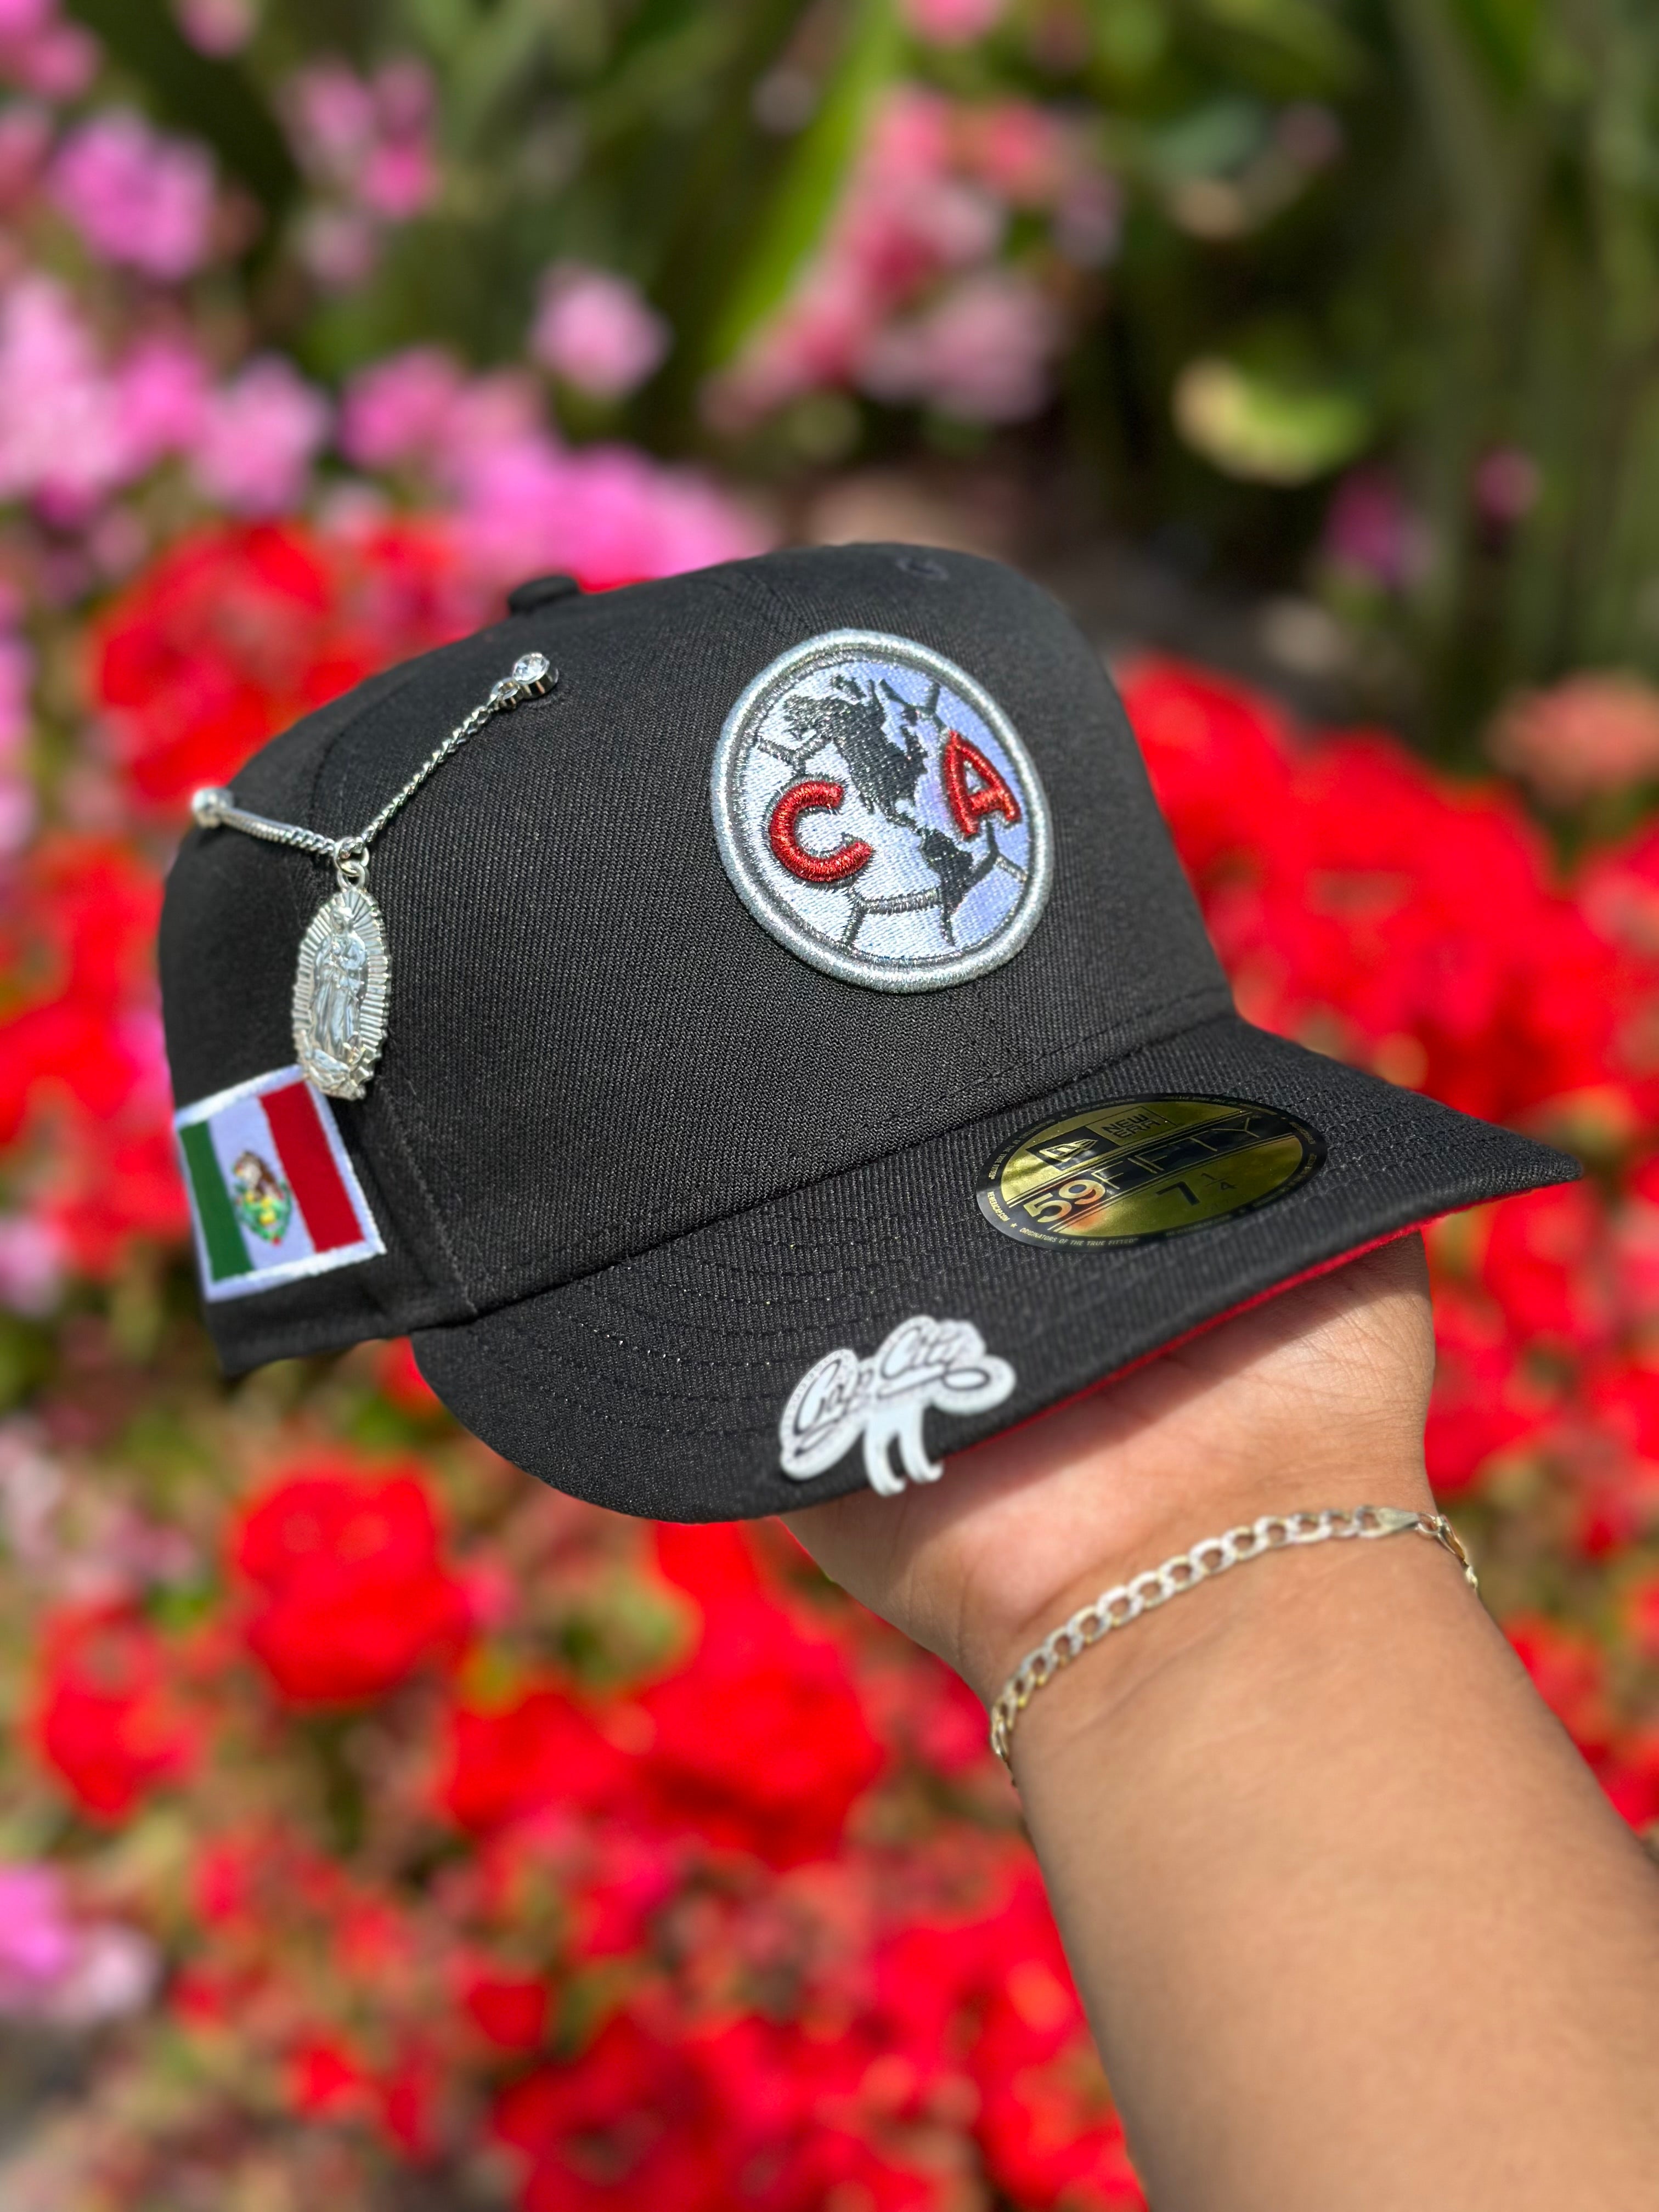 NEW ERA EXCLUSIVE 59FIFTY BLACK "CLUB AMERICA" W/ MEXICO FLAG SIDE PATCH